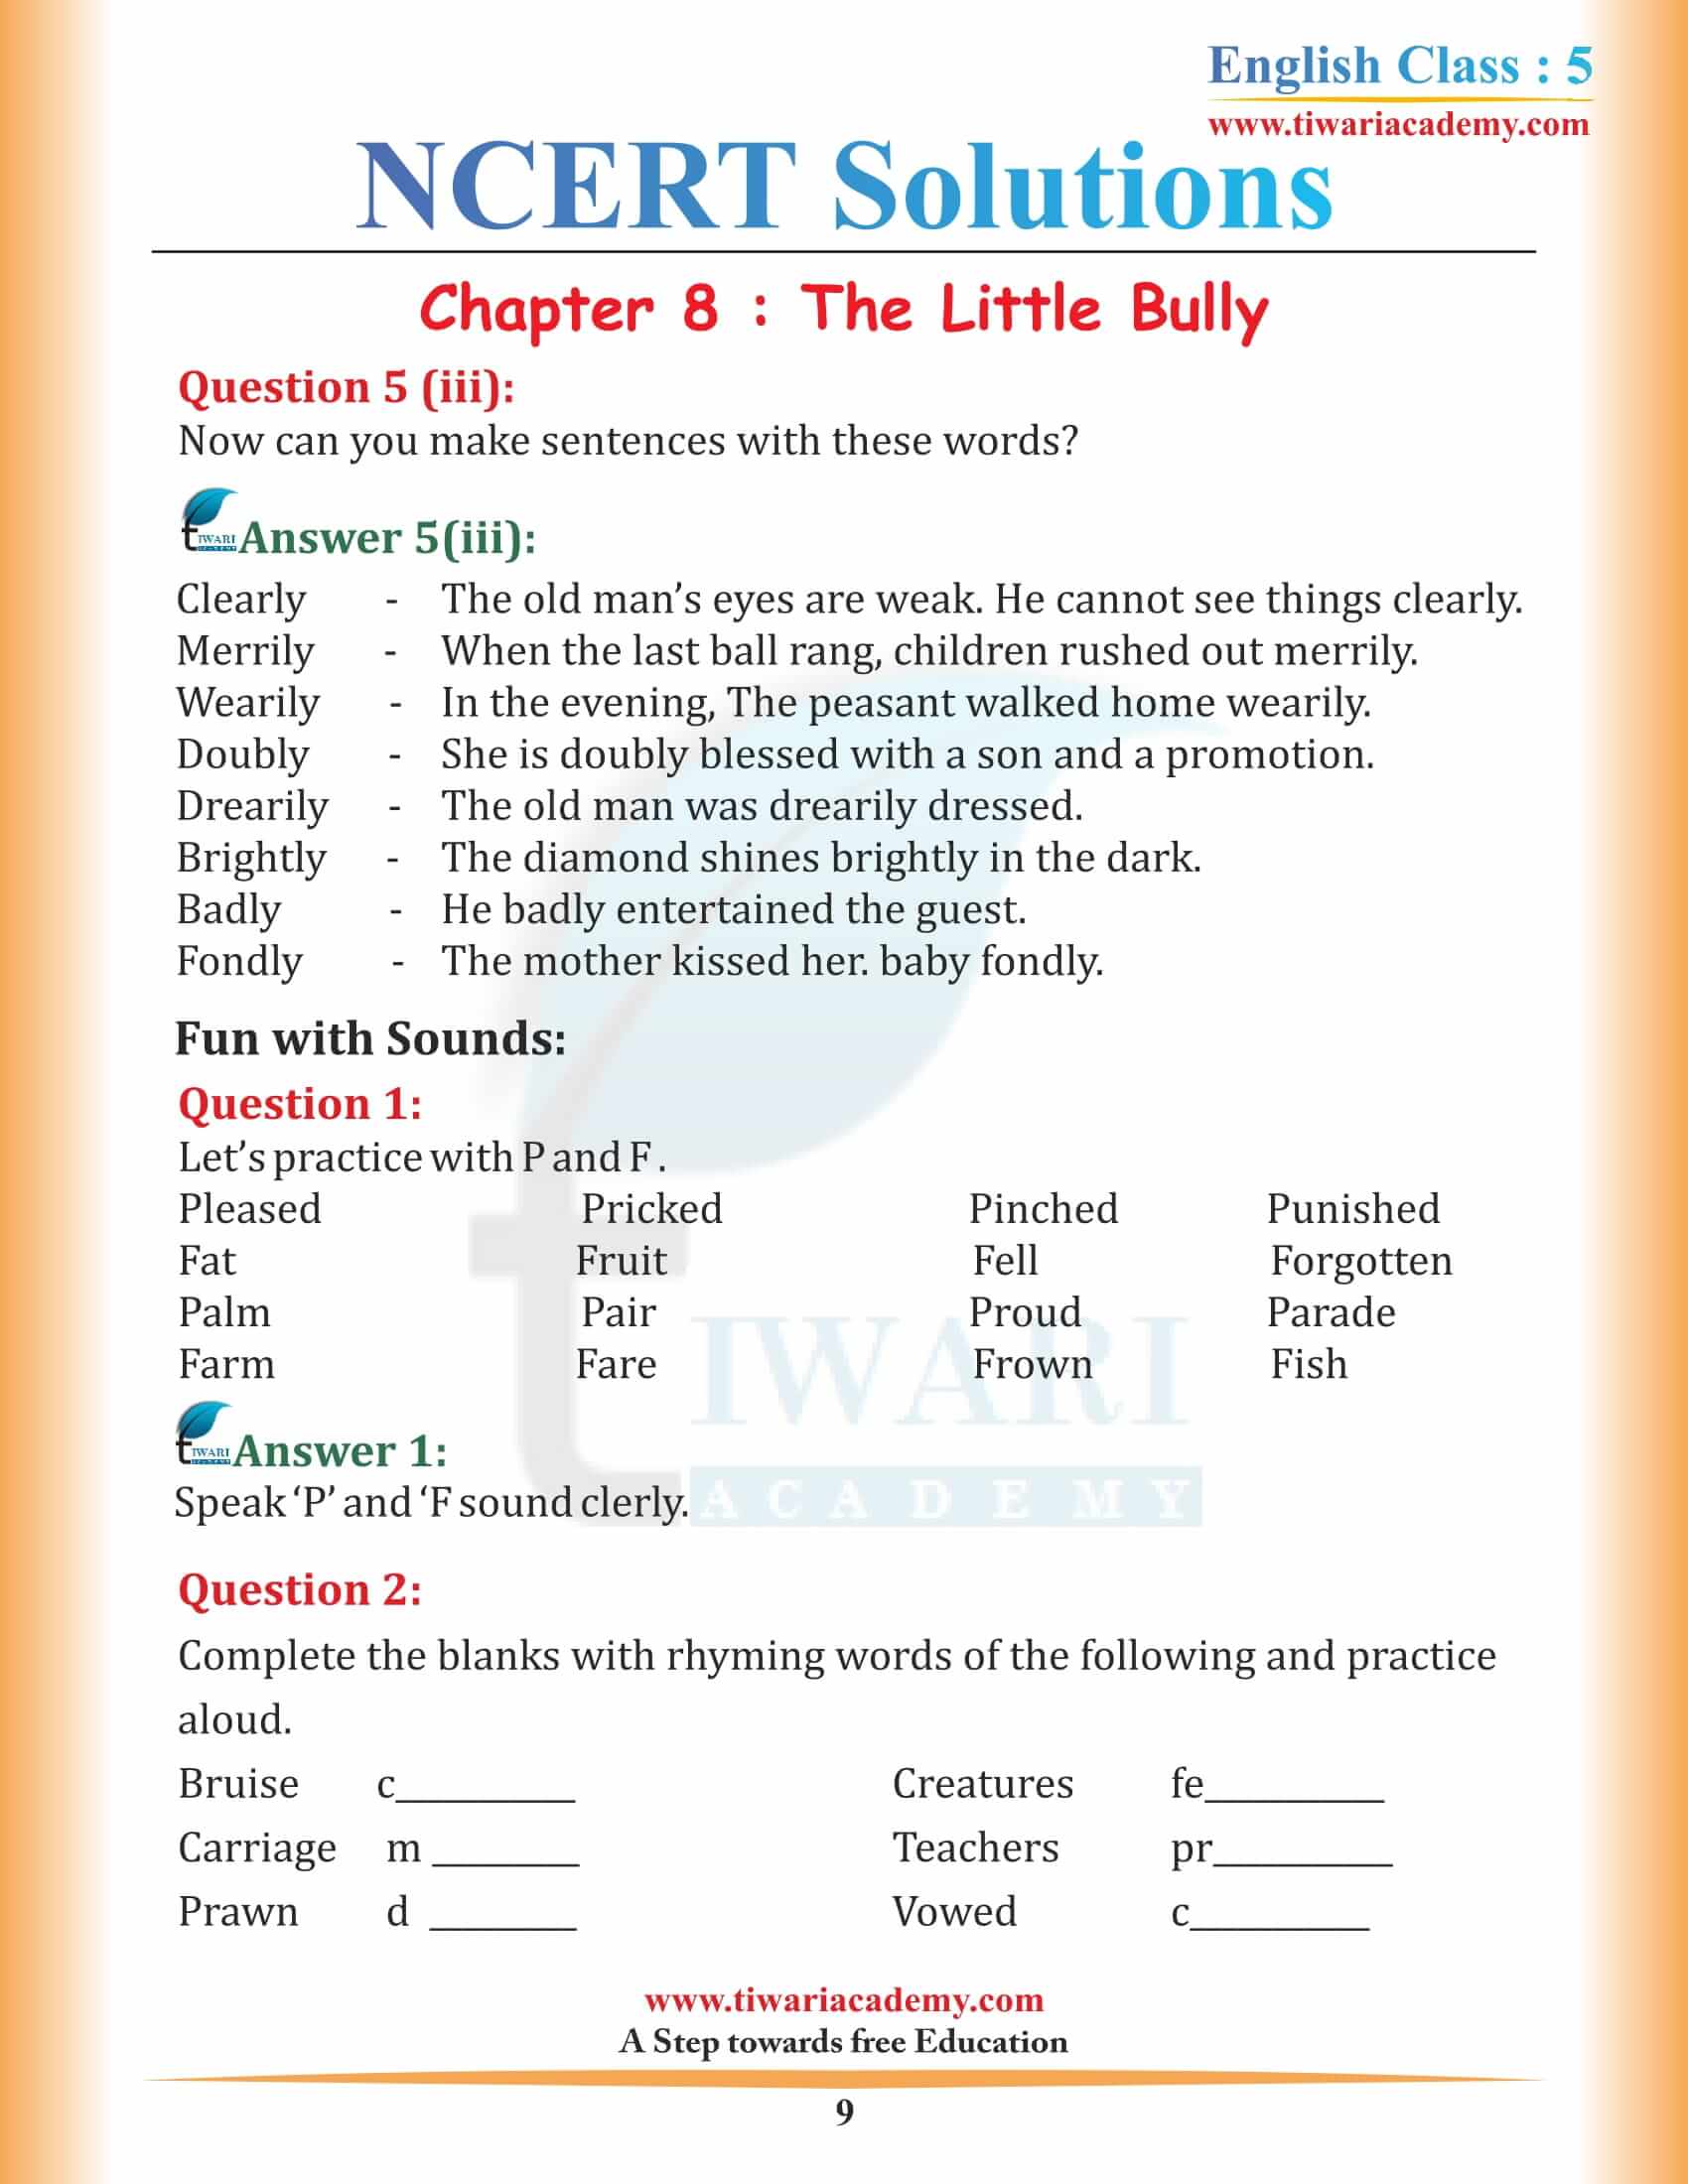 NCERT Solutions for Class 5 English Chapter 8 The Little Bully free download